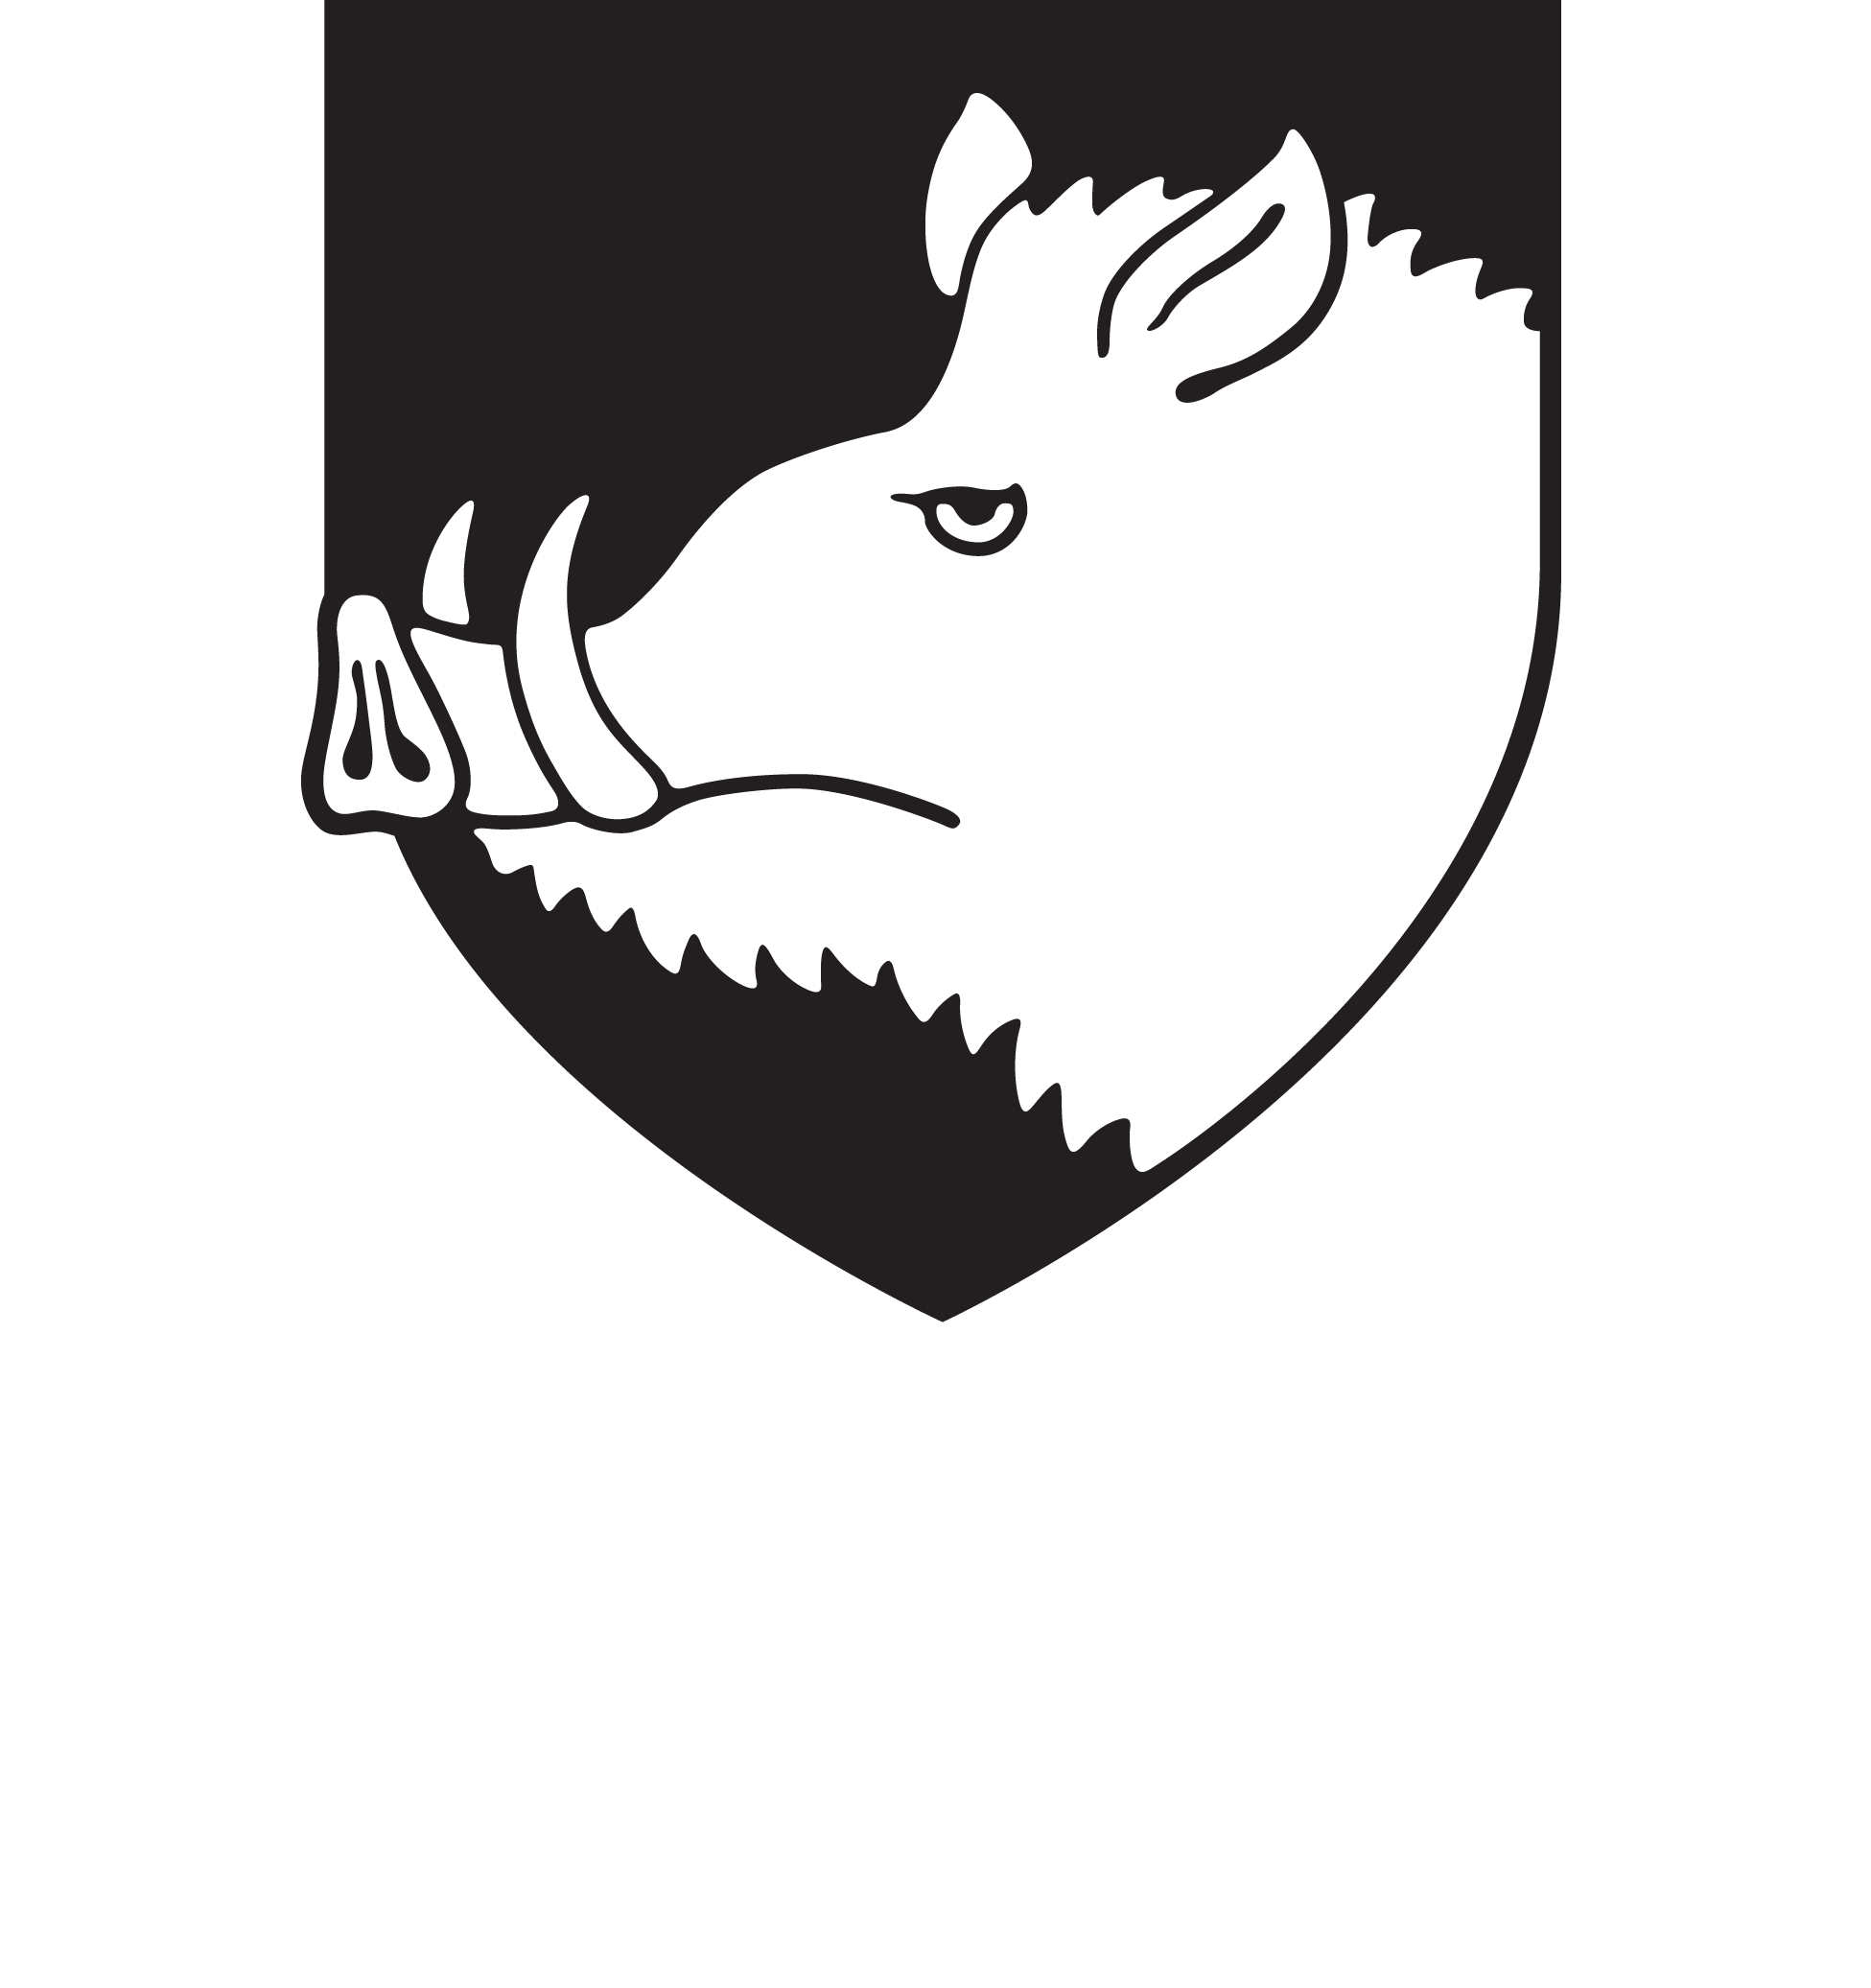 ABOUT - Northern Broadsides - History, Ethos, Awards and Style